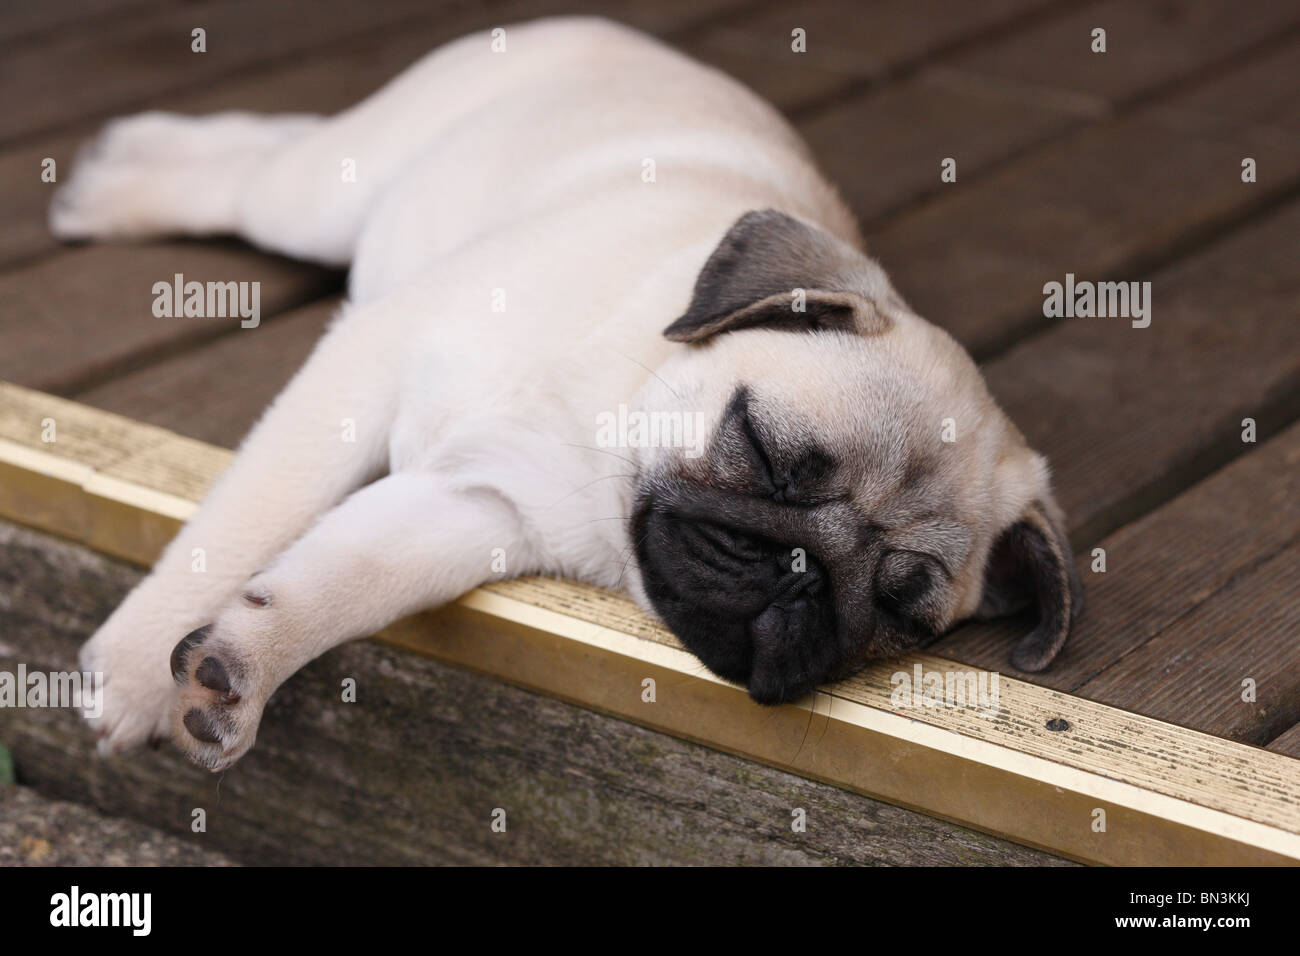 Pug (Canis lupus f. familiaris), whelp sleeping on a wooden floor Stock Photo